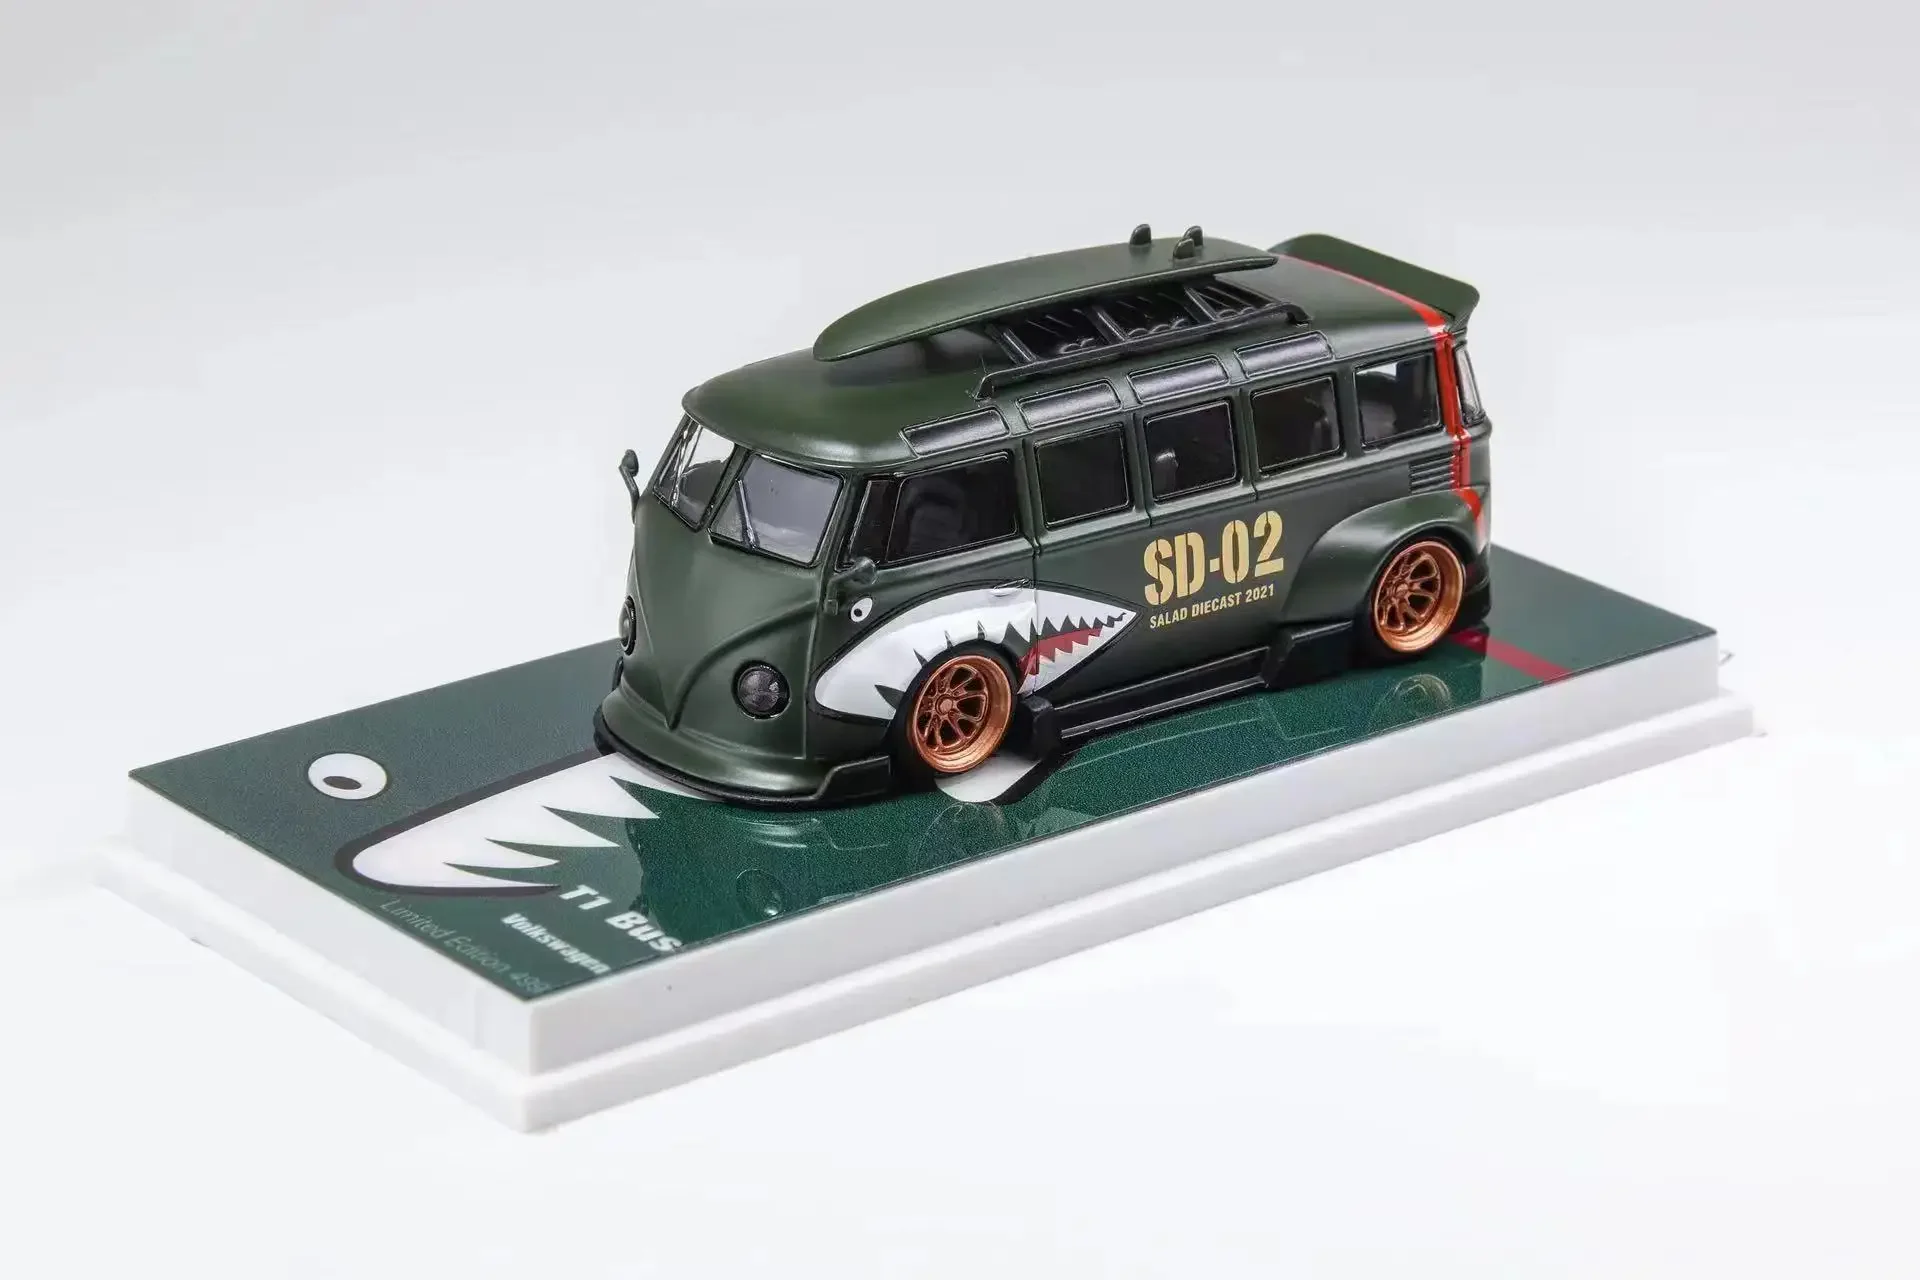 

Flame Model 1:64 T1 Kombi WHITE GREEN PINK limited500 Diecast Model Car